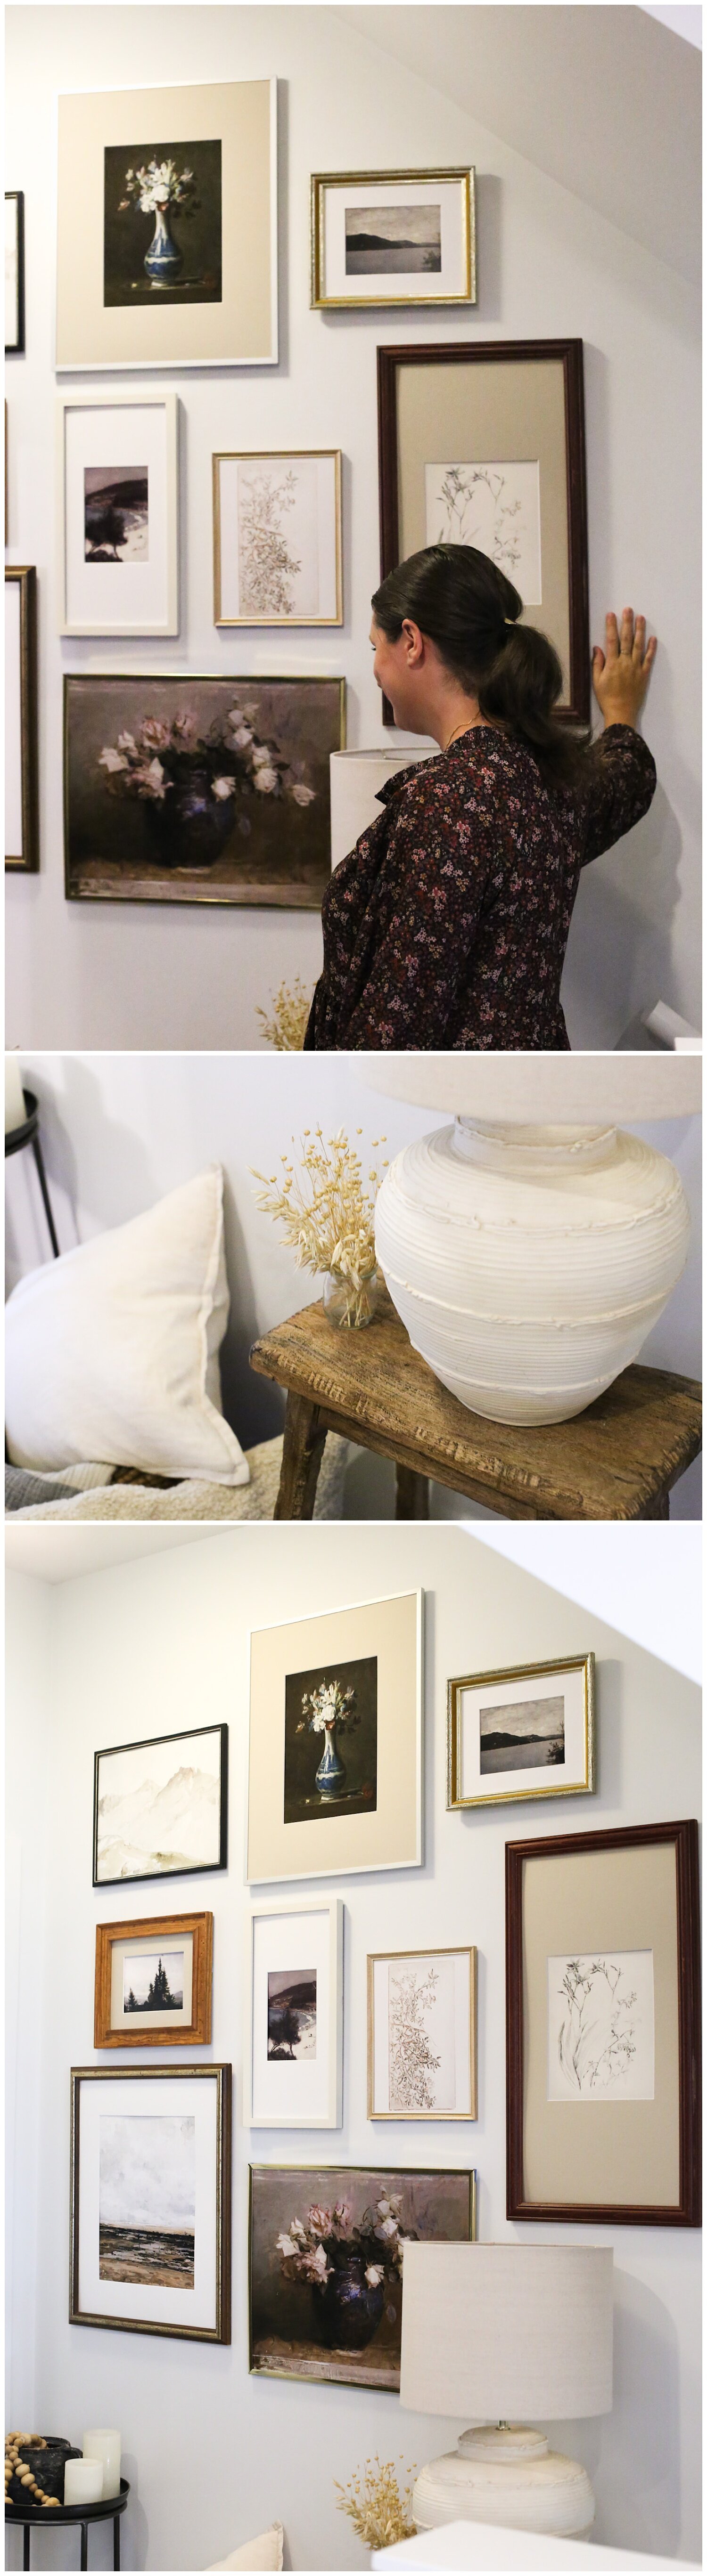 diy-gallery-wall-template-eclectic-vintage-gallery-wall-kendra-found-it